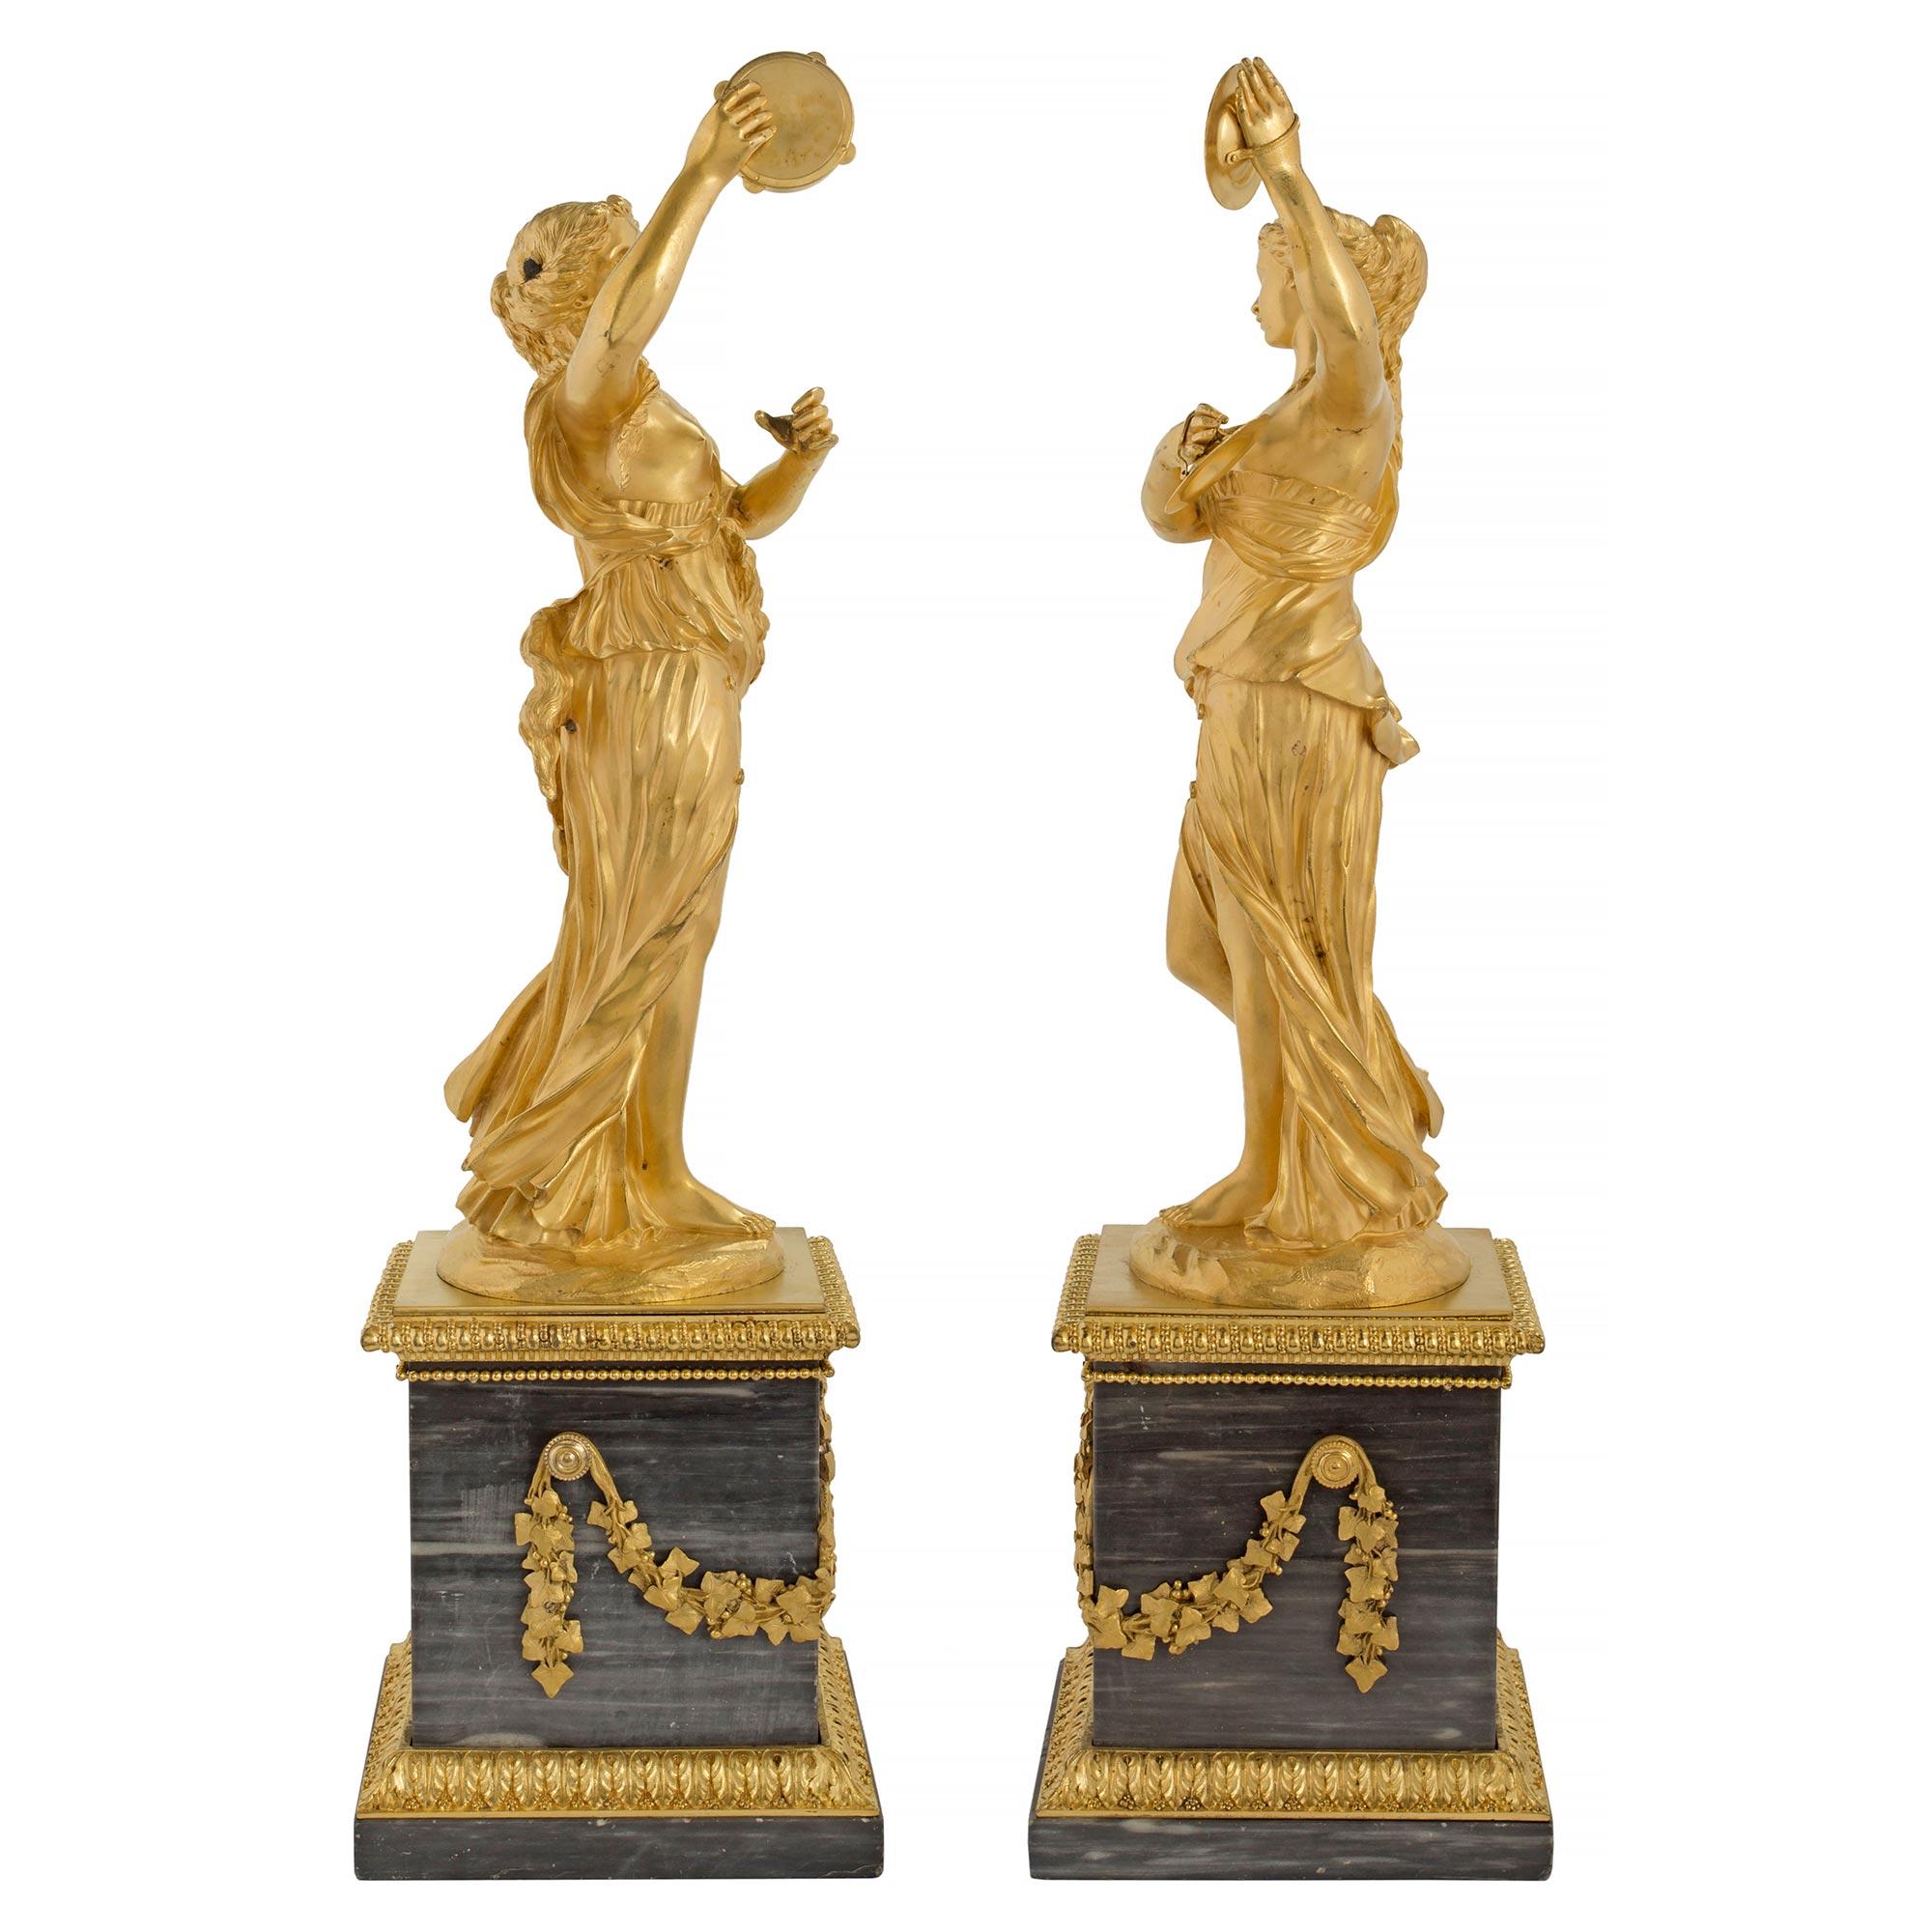 Ormolu Pair of French Mid-19th Century Louis XVI Style Decorative Statues For Sale